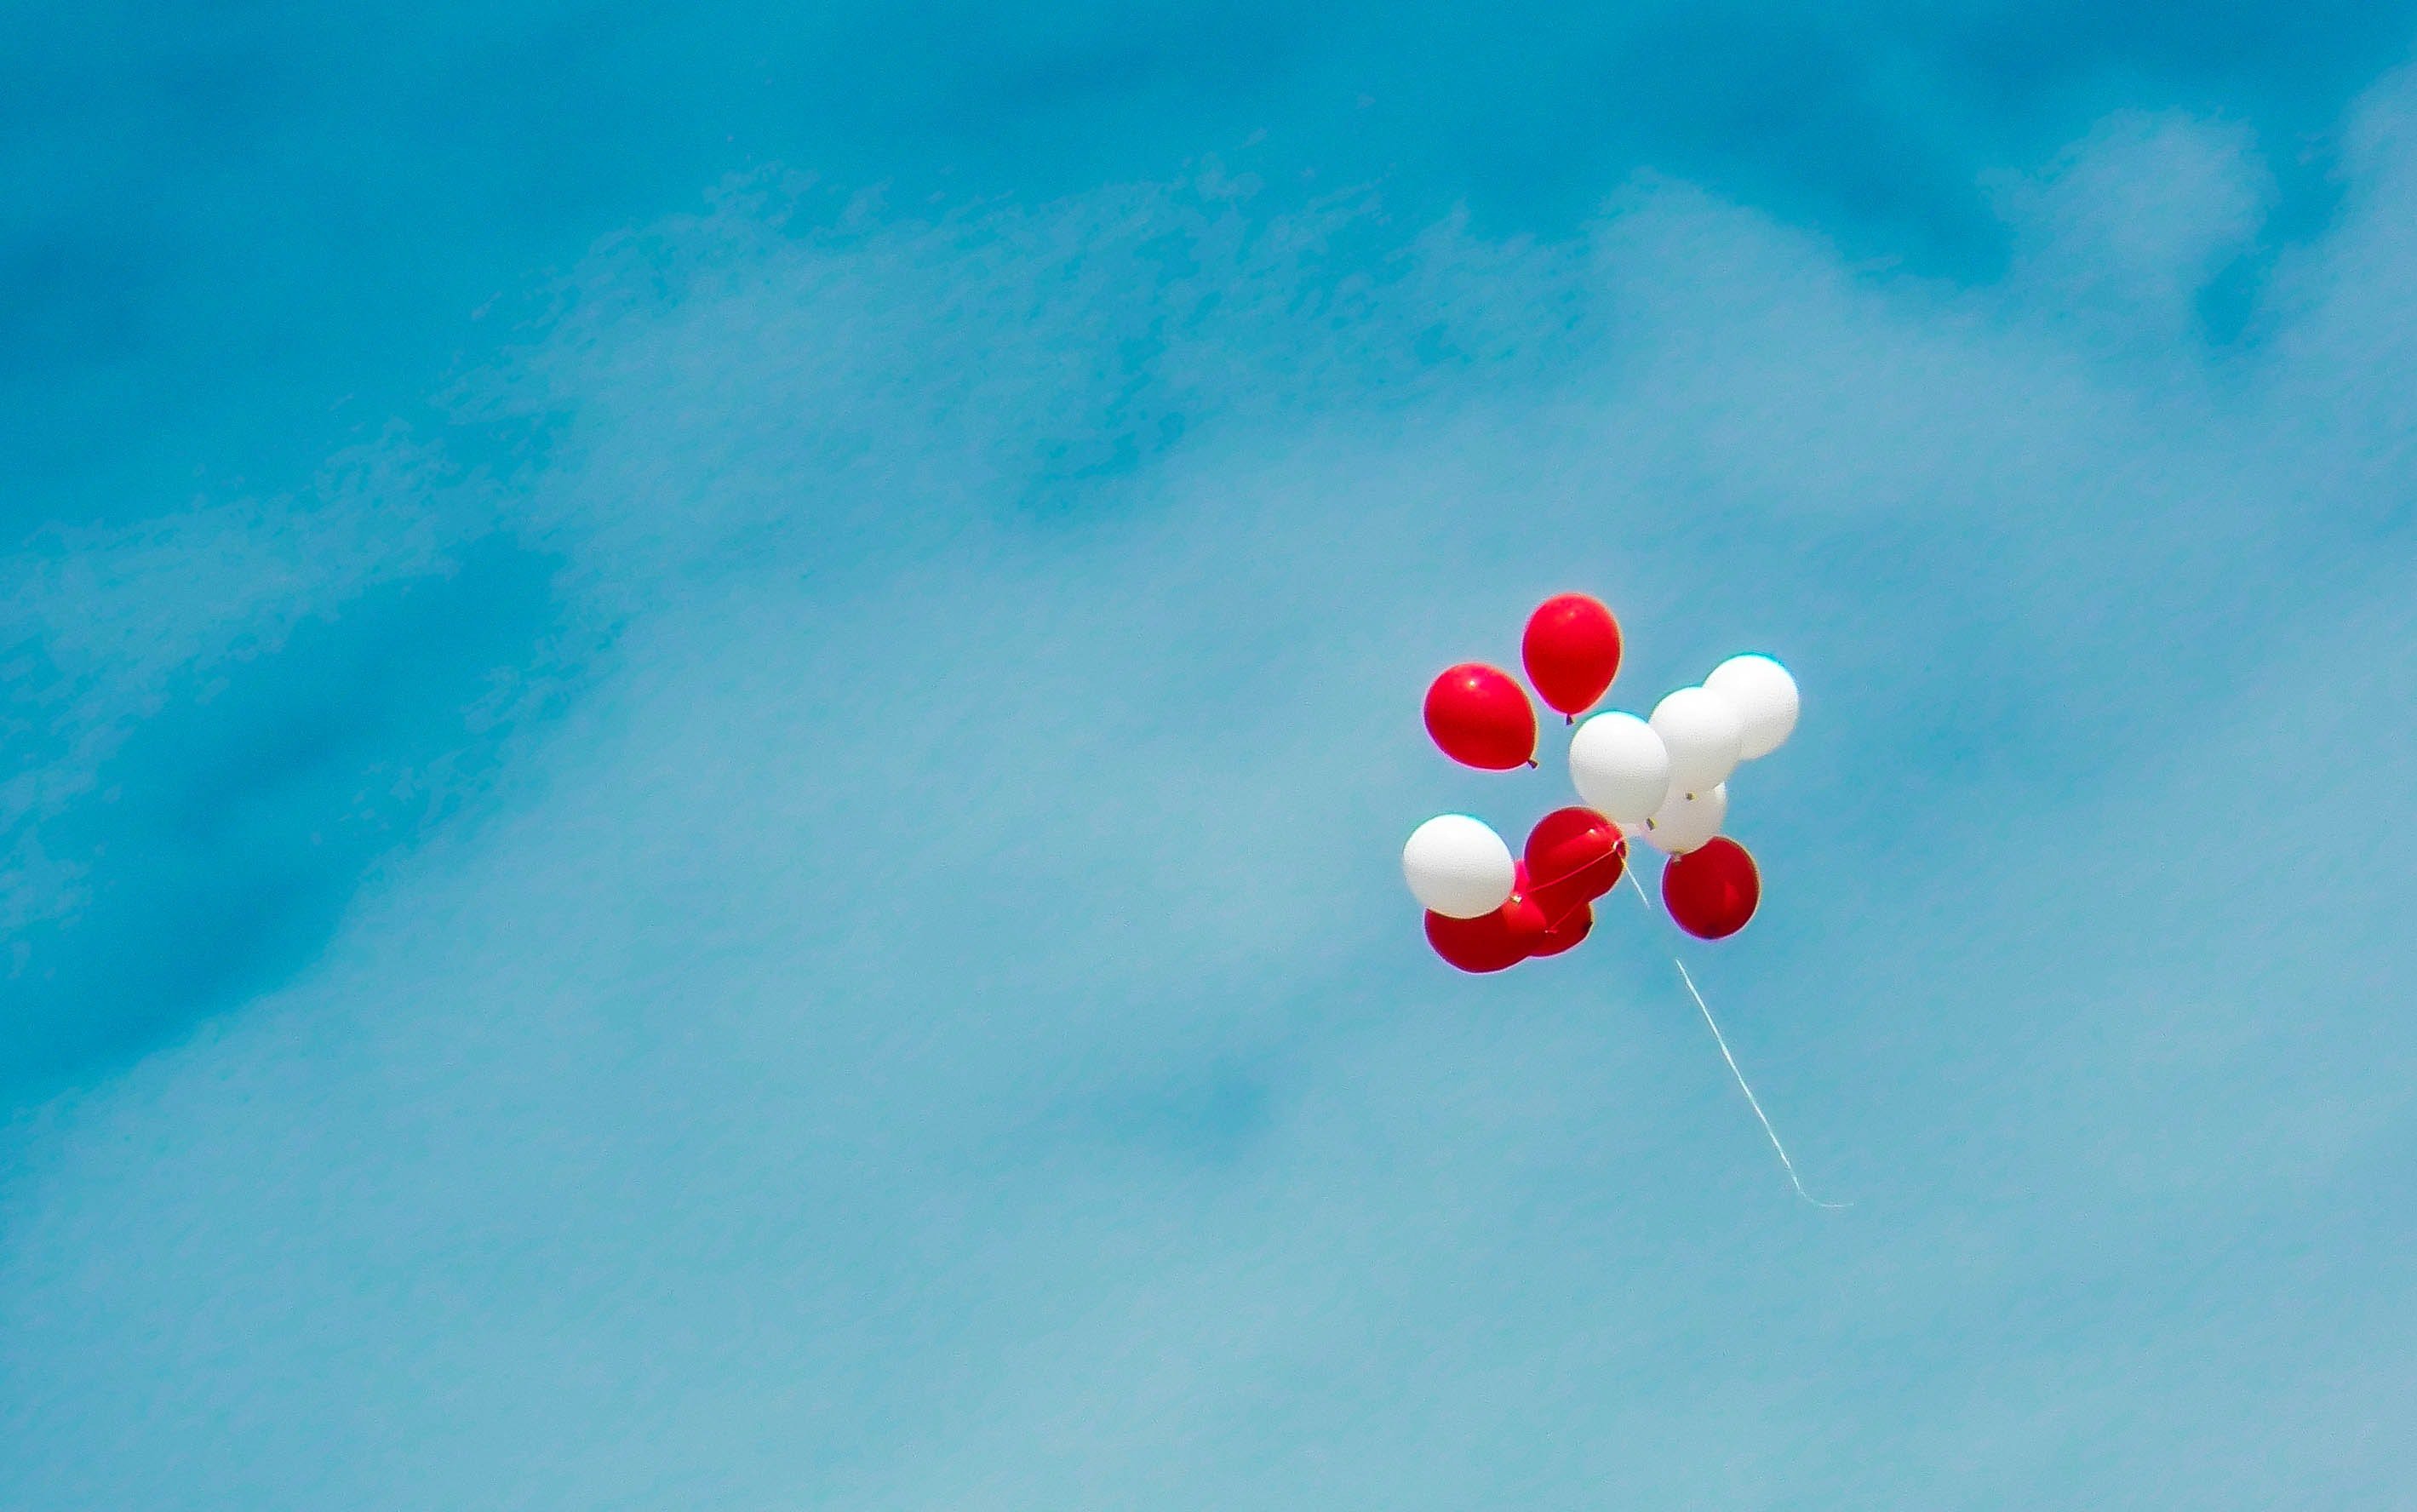 Red and white balloons in the sky. | Photo: Pexels